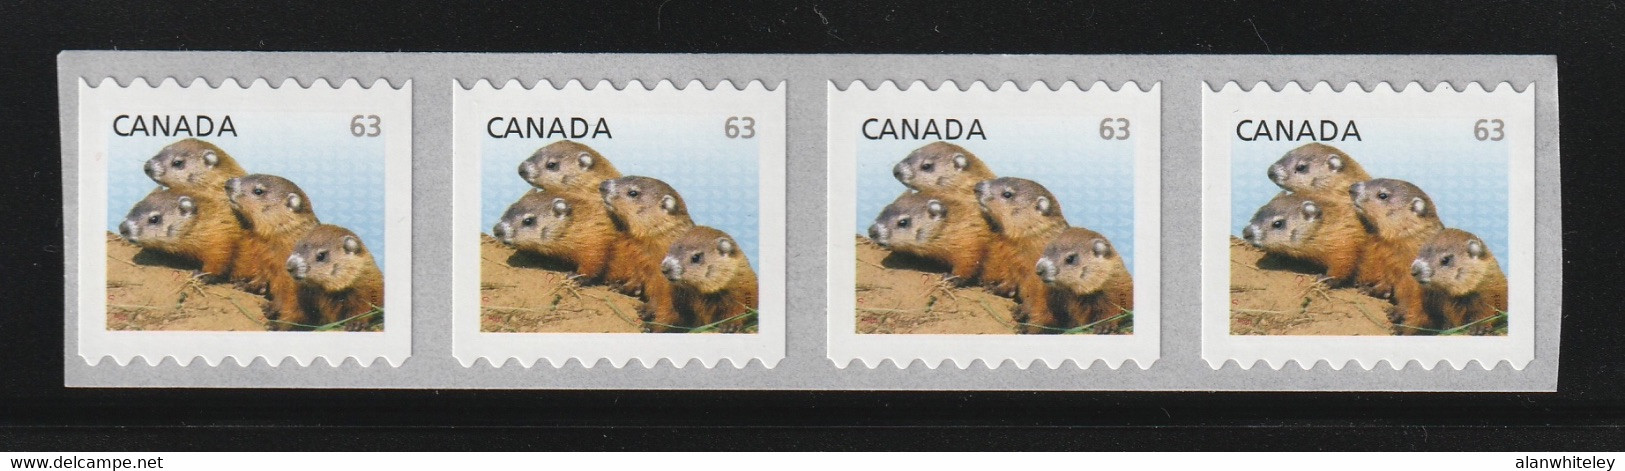 CANADA 2013 Definitives / Young Wildlife / Woodchucks 63c S/ADH: Strip Of 4 Stamps (Sideways) UM/MNH - Rollo De Sellos